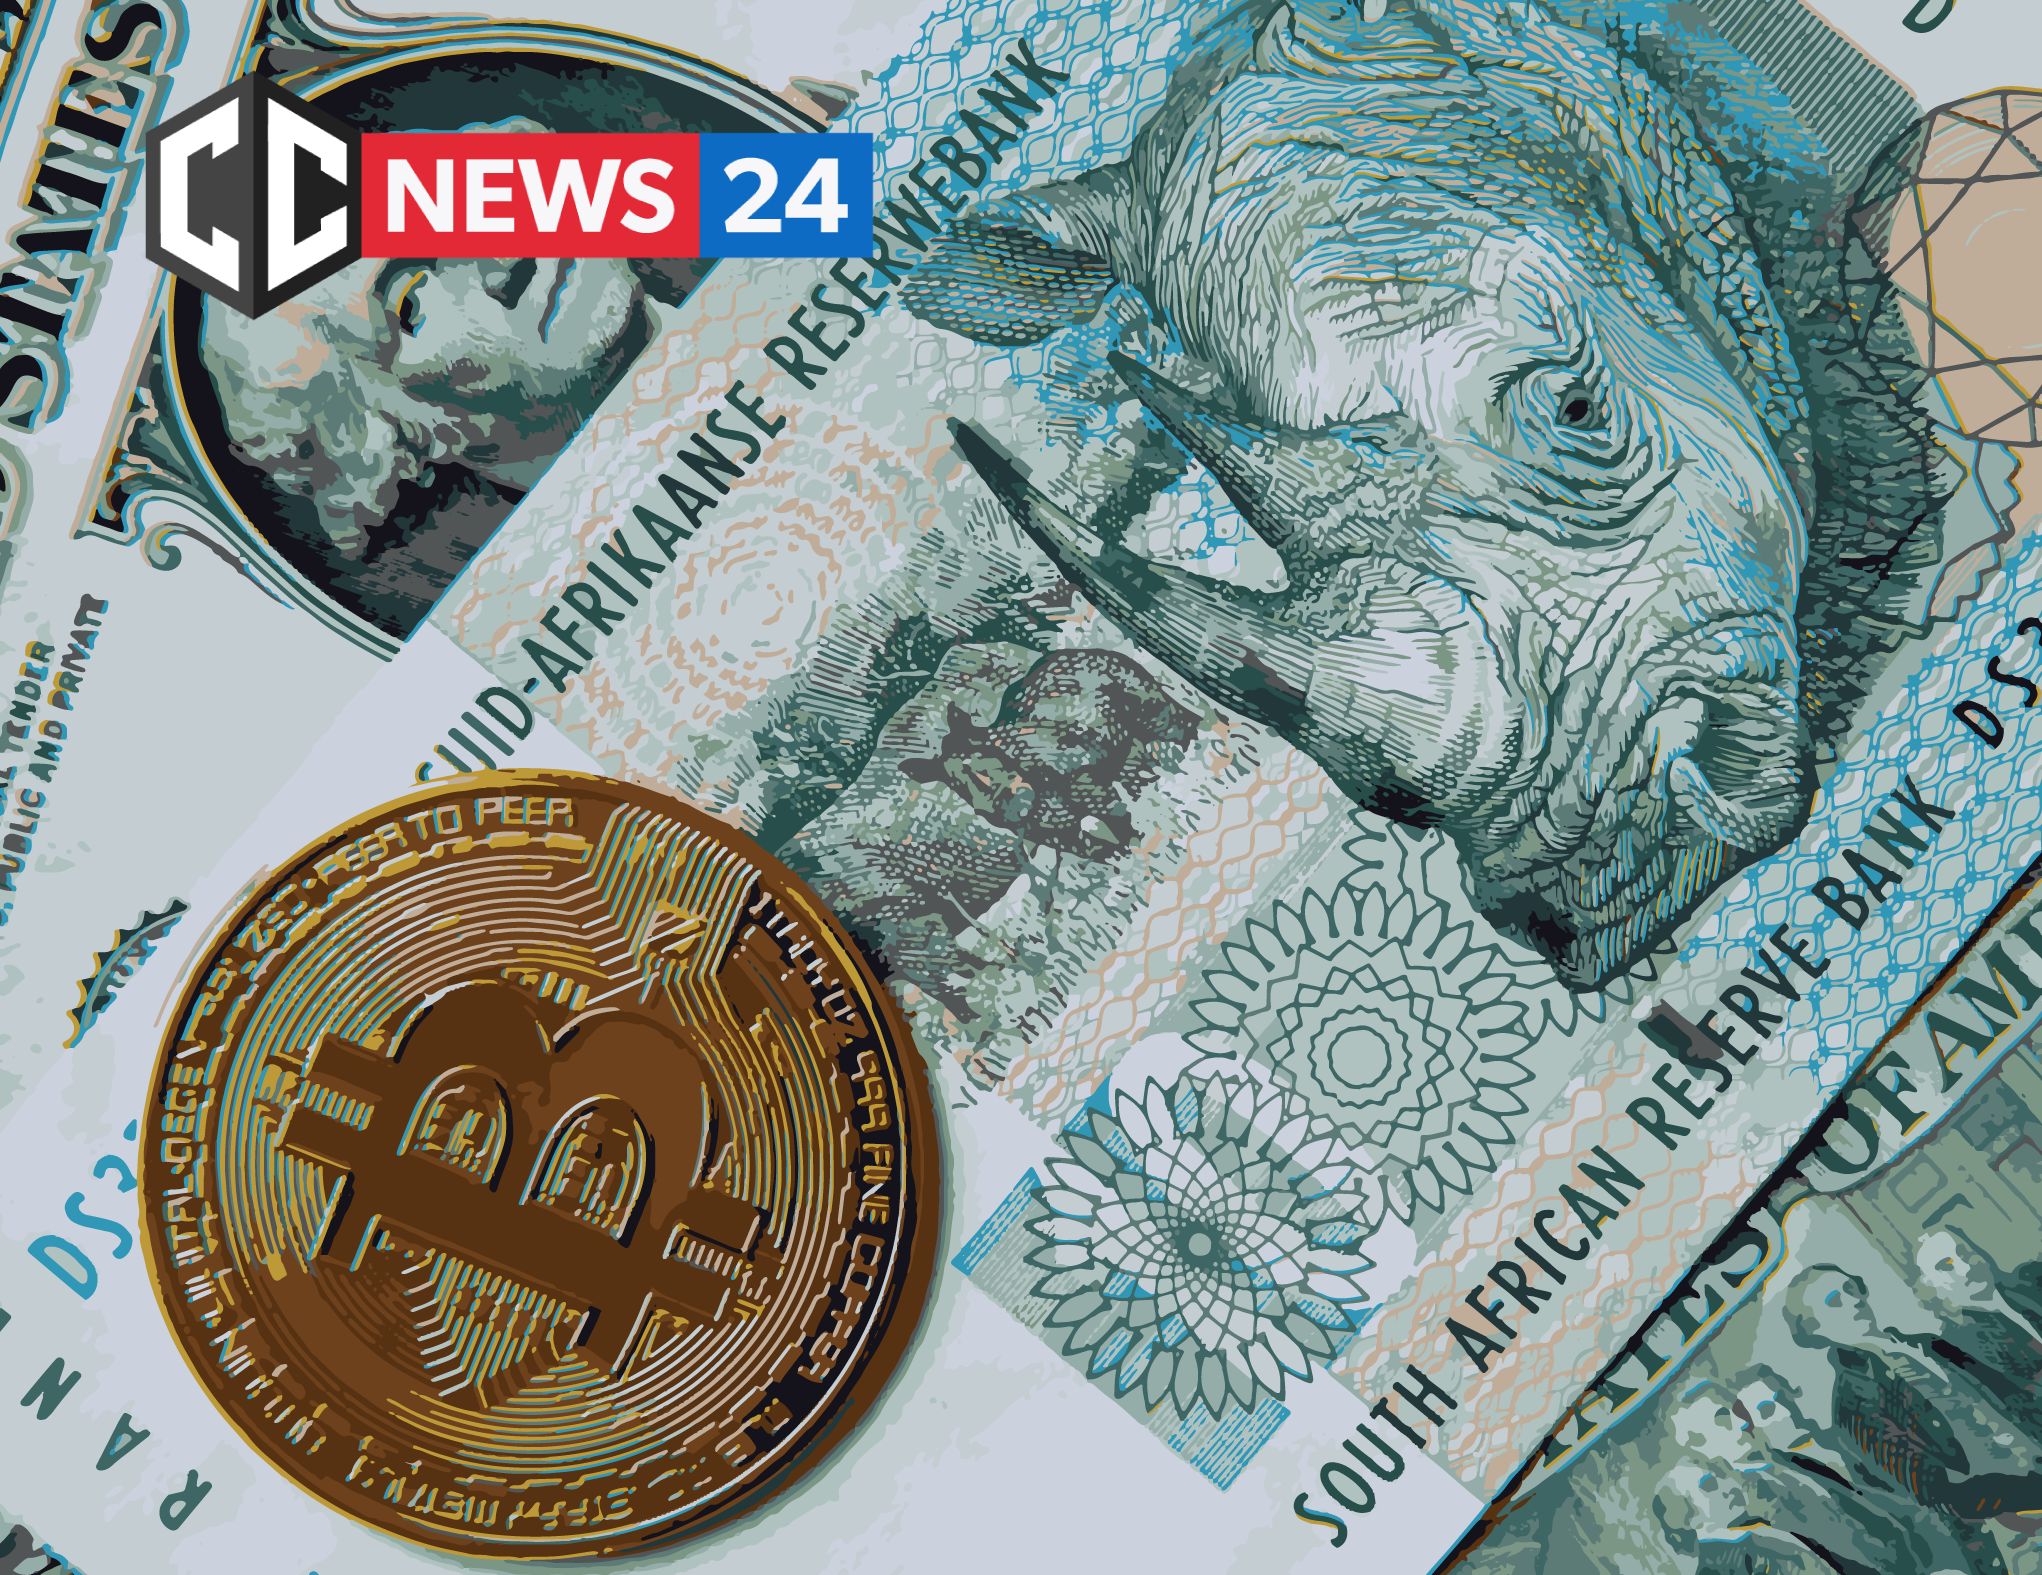 Private South African companies have converted cash to Bitcoin and today show extraordinary returns